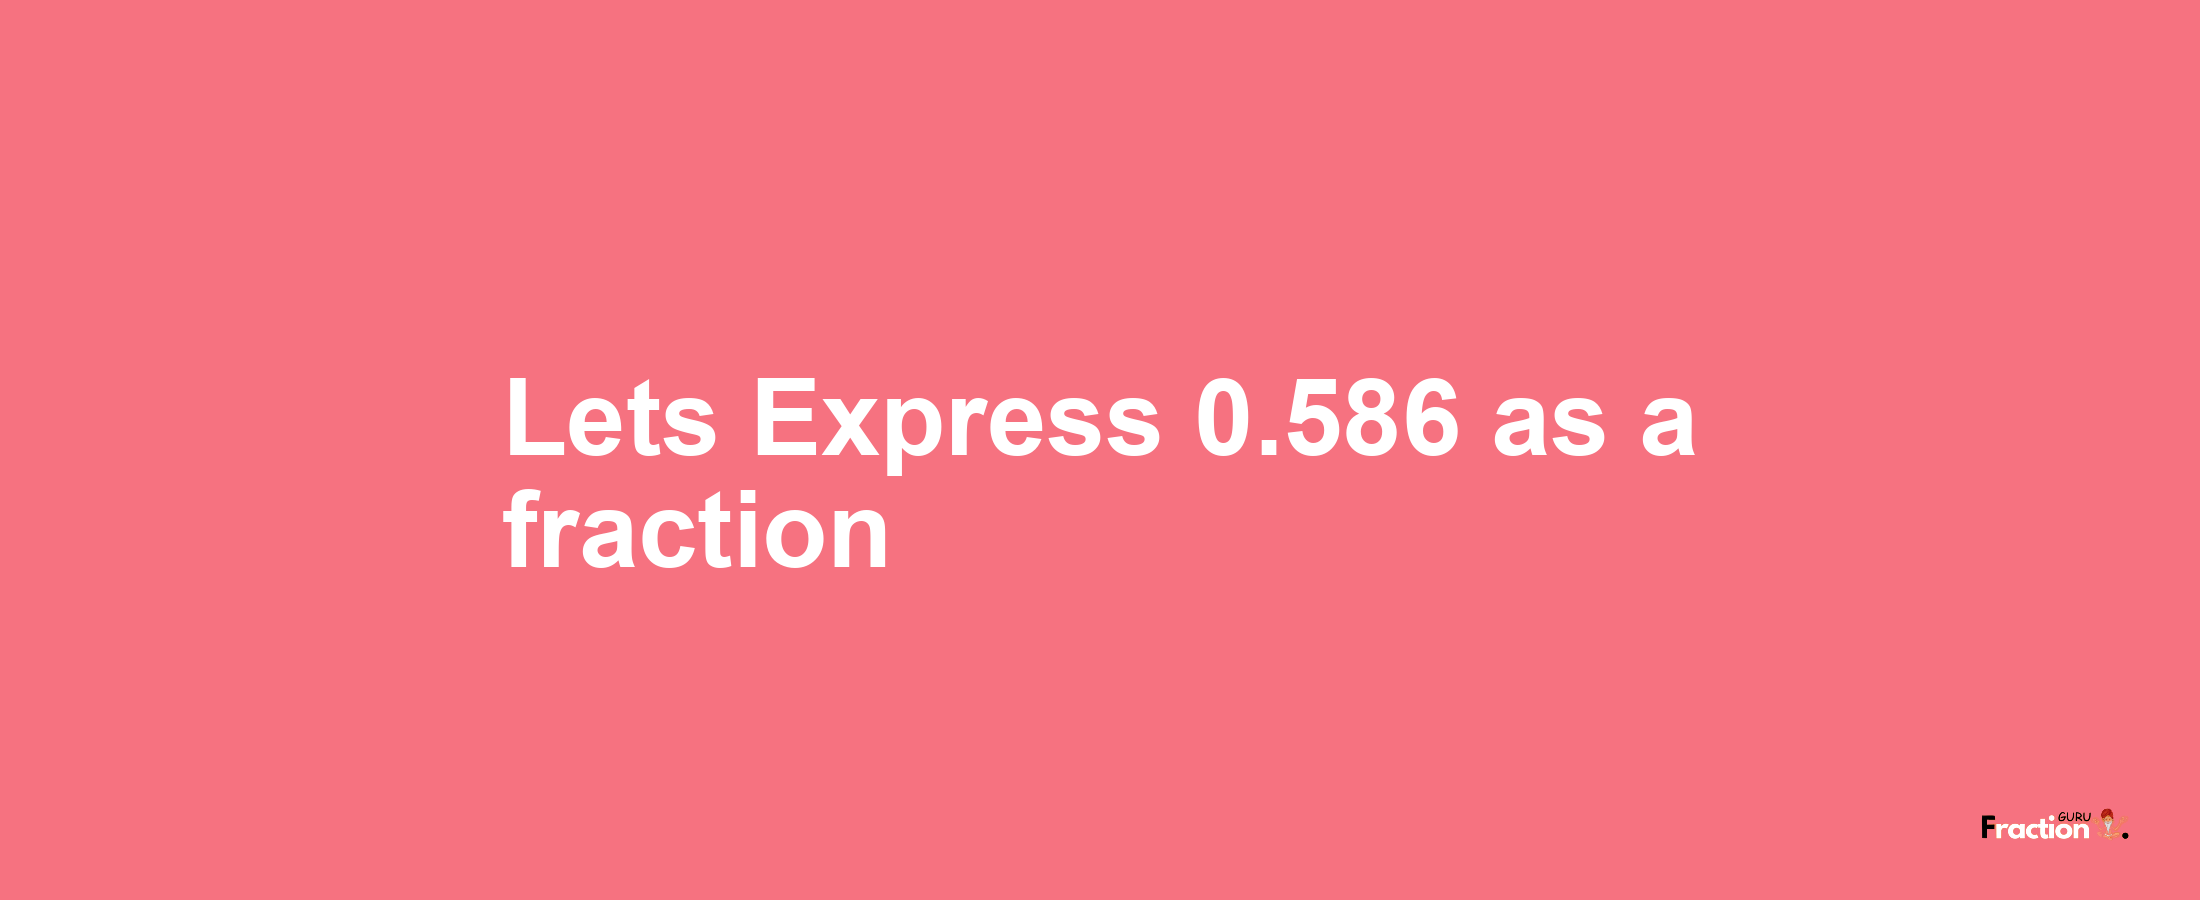 Lets Express 0.586 as afraction